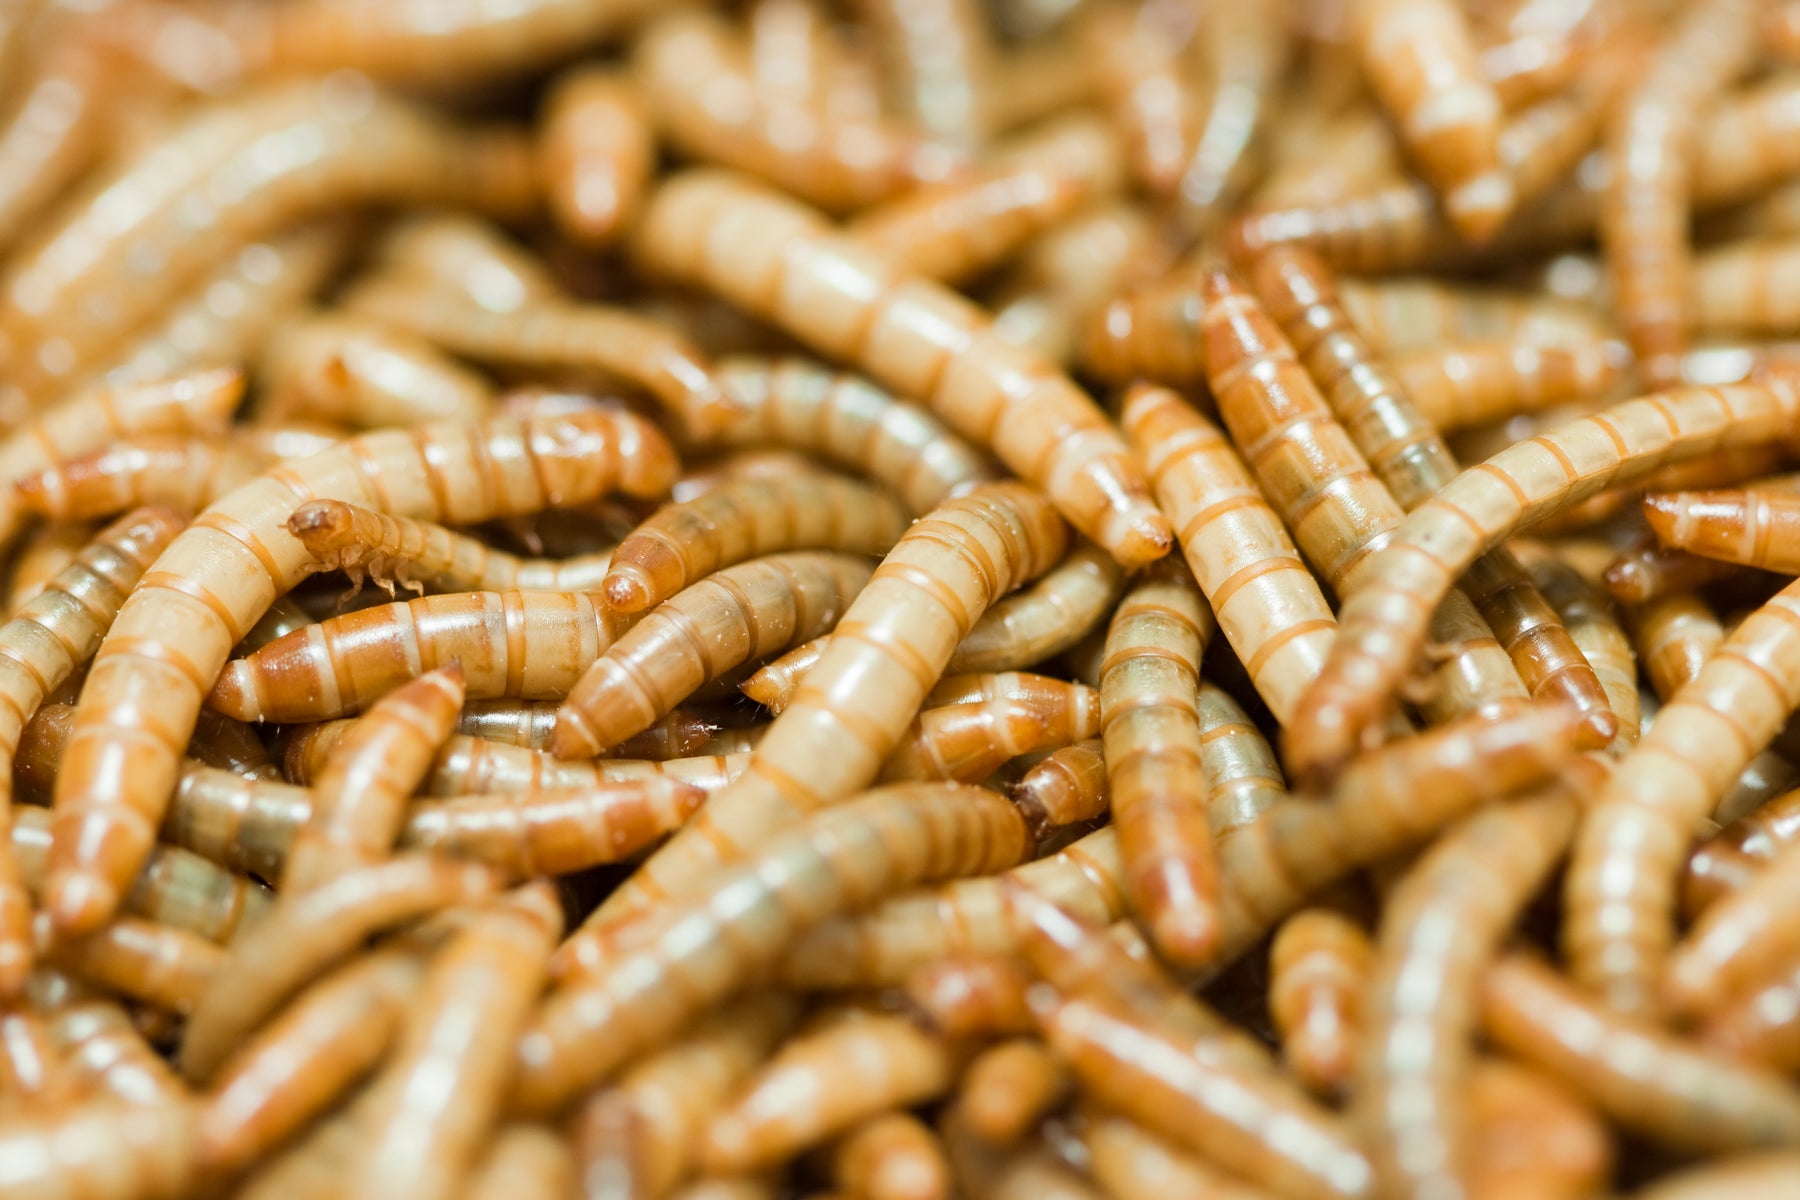 How to Care for Your Mealworms